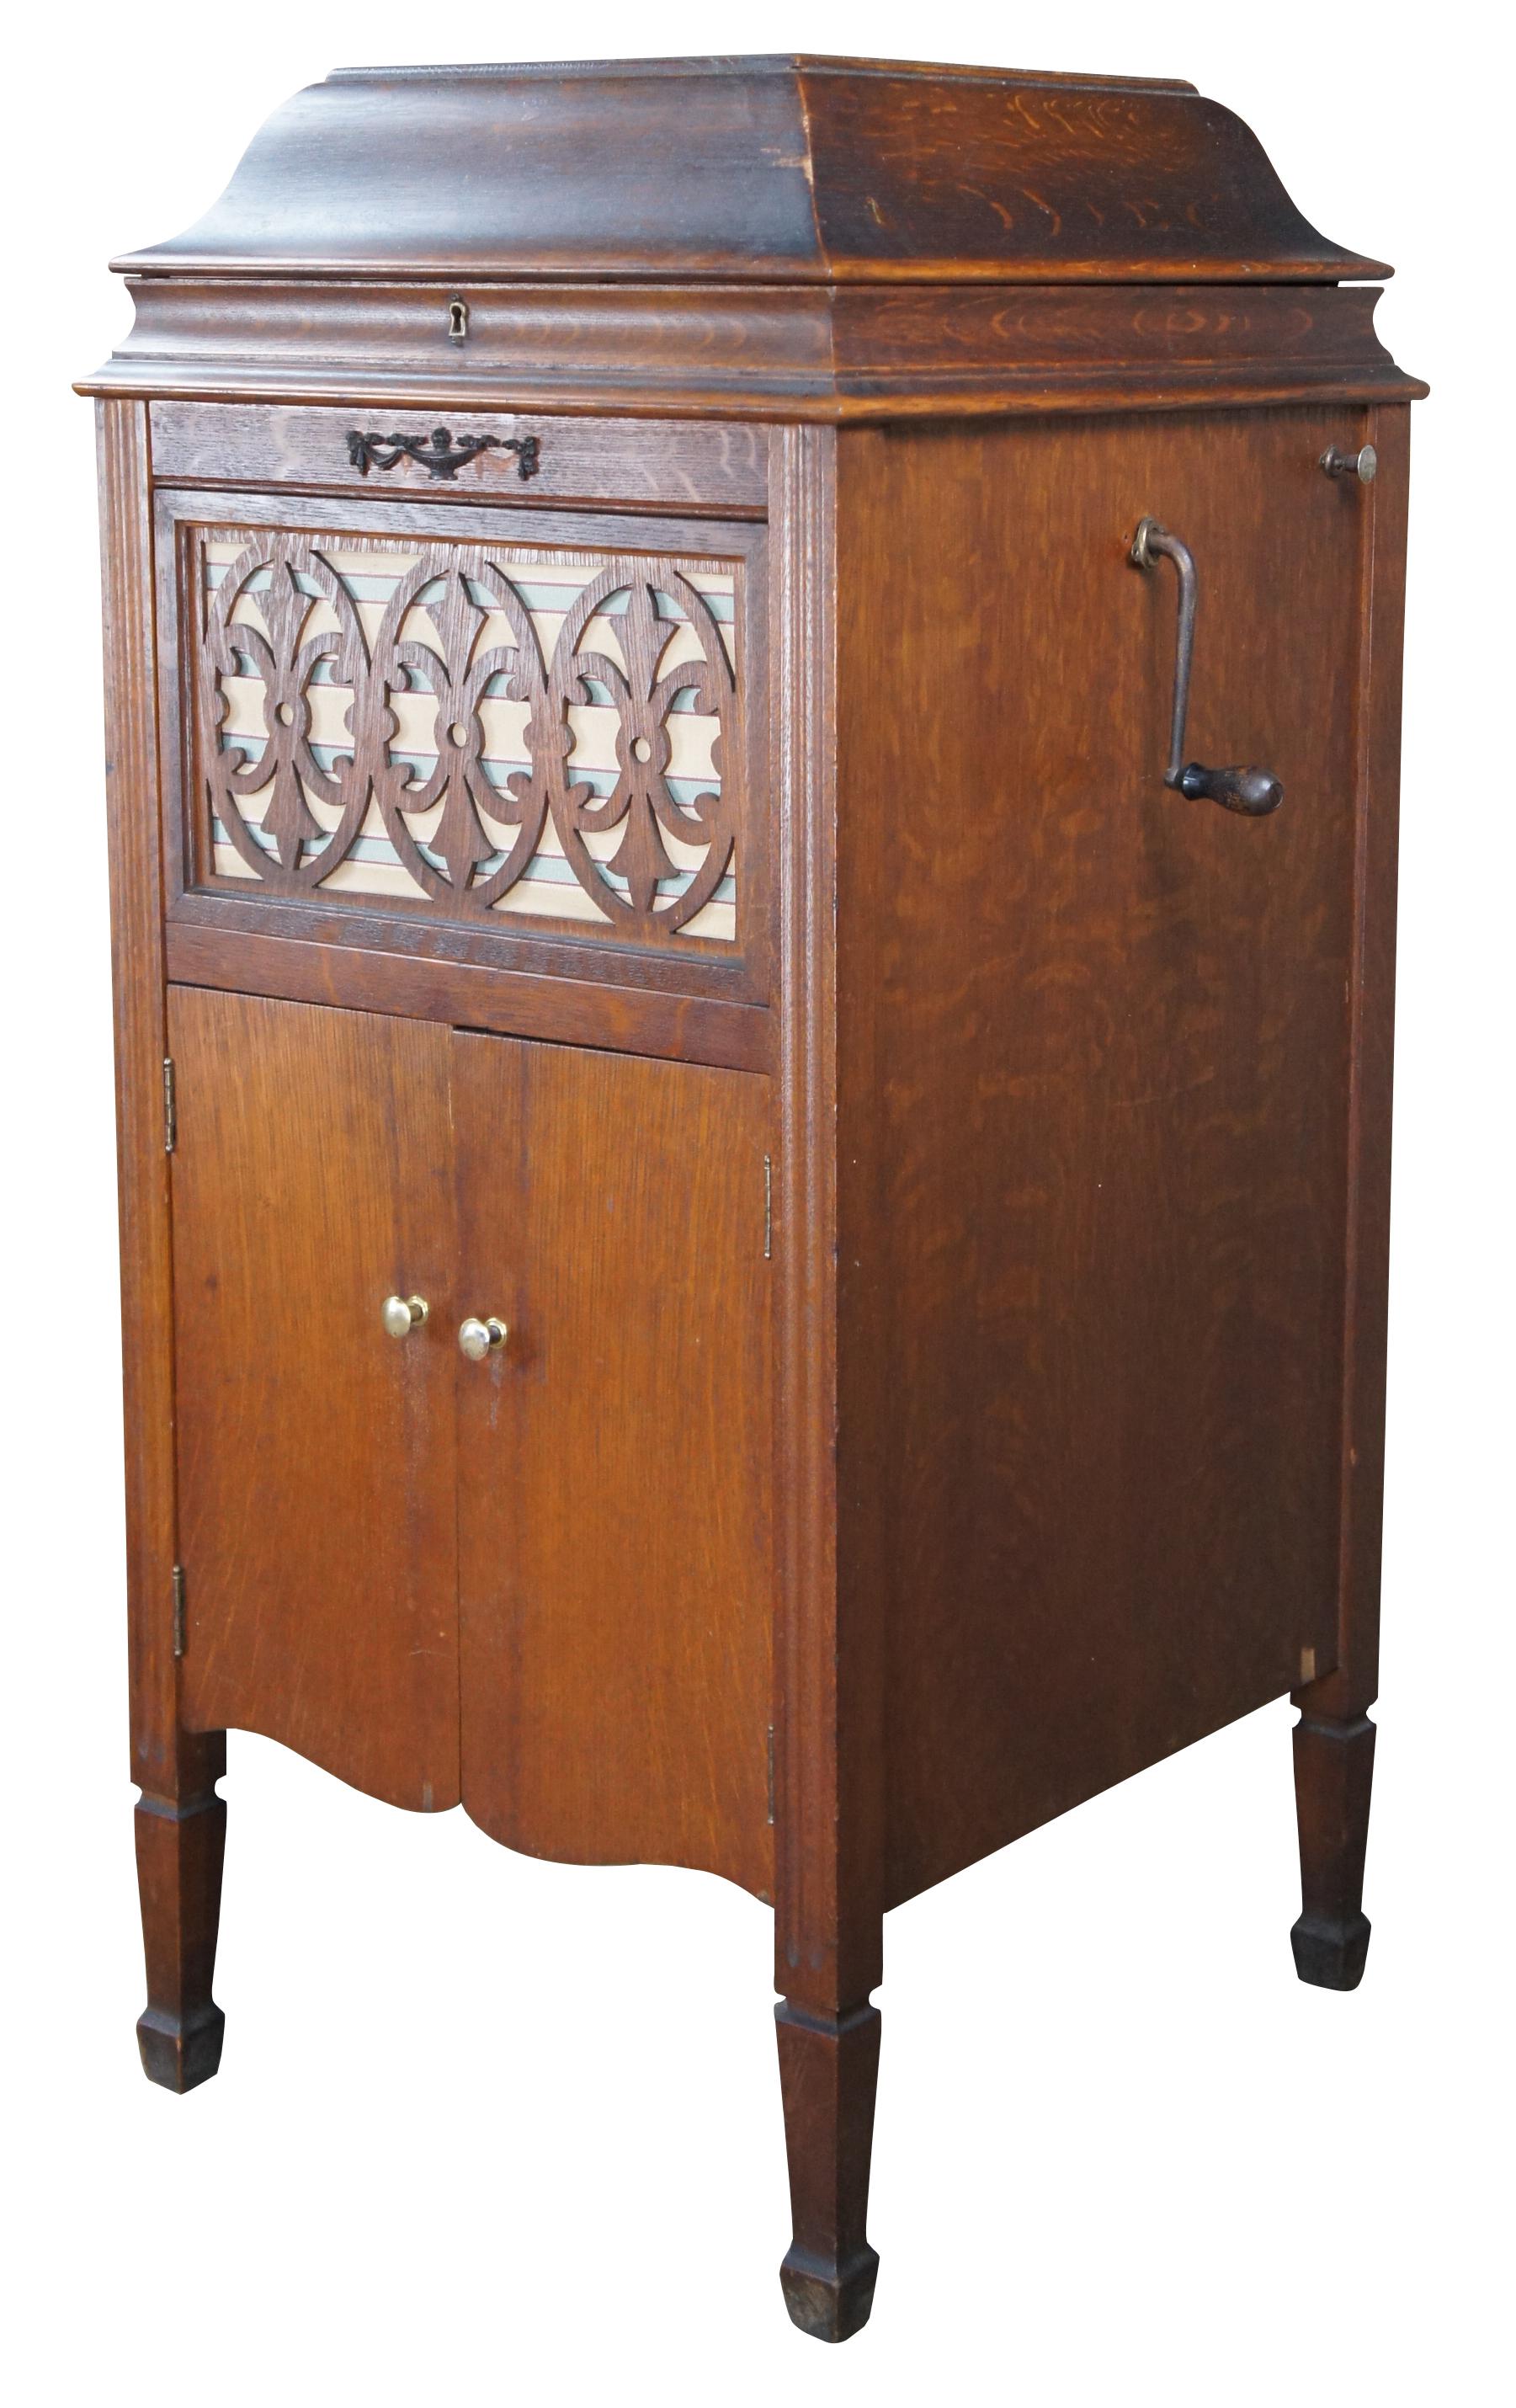 Antique Sears and Roebuck Silvertone Phonograph. Finished in oak with a quartersawn case. Features a nice cut geometric medallion over the speaker and lower storage below.  Model XIII Circa 1918.

The Silvertone logo features this little sprite